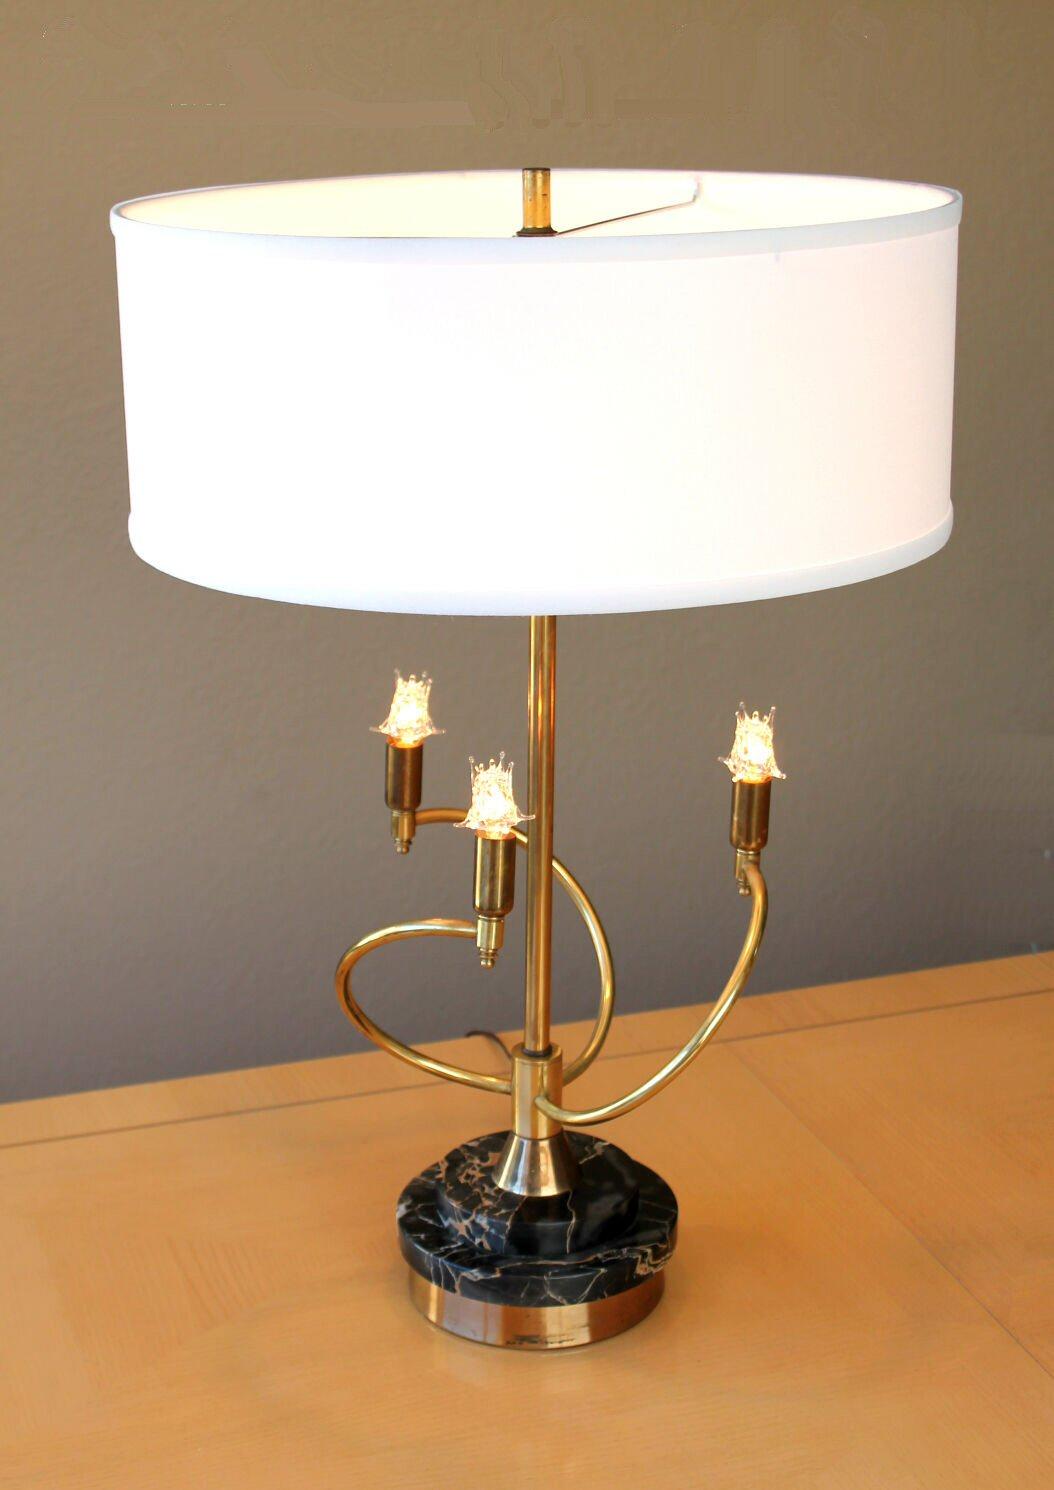 FABULOUS MODERNISM!

MUTUAL SUNSET 
4-LIGHT
MID CENTURY MODERN
TABLE LAMP!

ITALIAN MARBLE AND BRASS 
The 